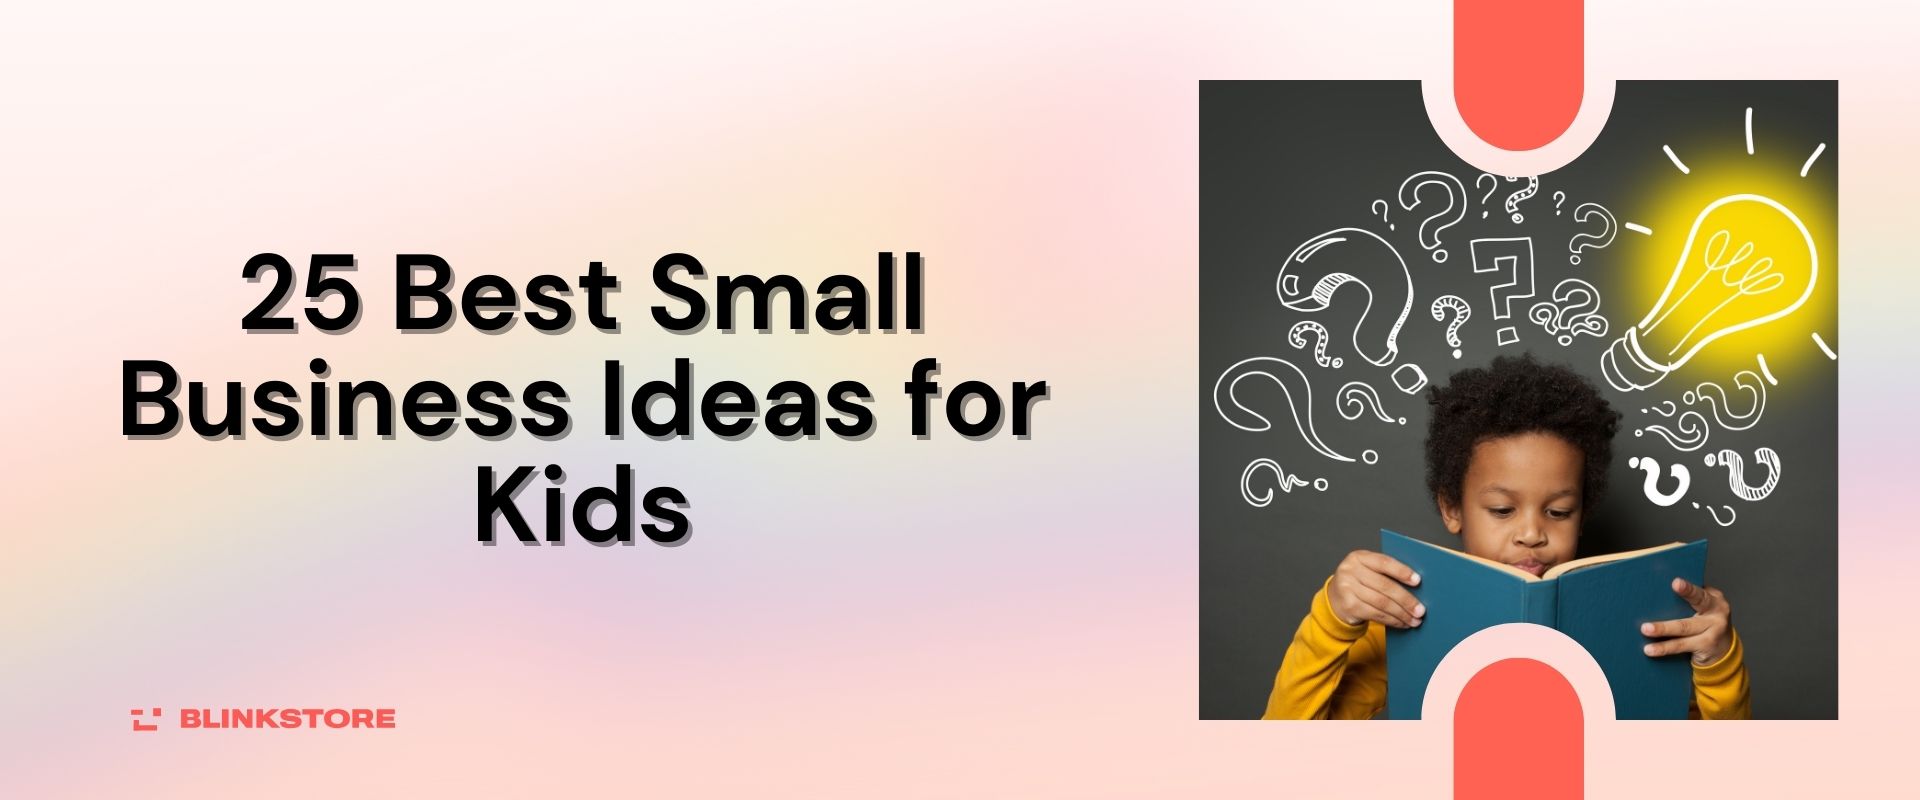 25 Best Small Business Ideas for Kids